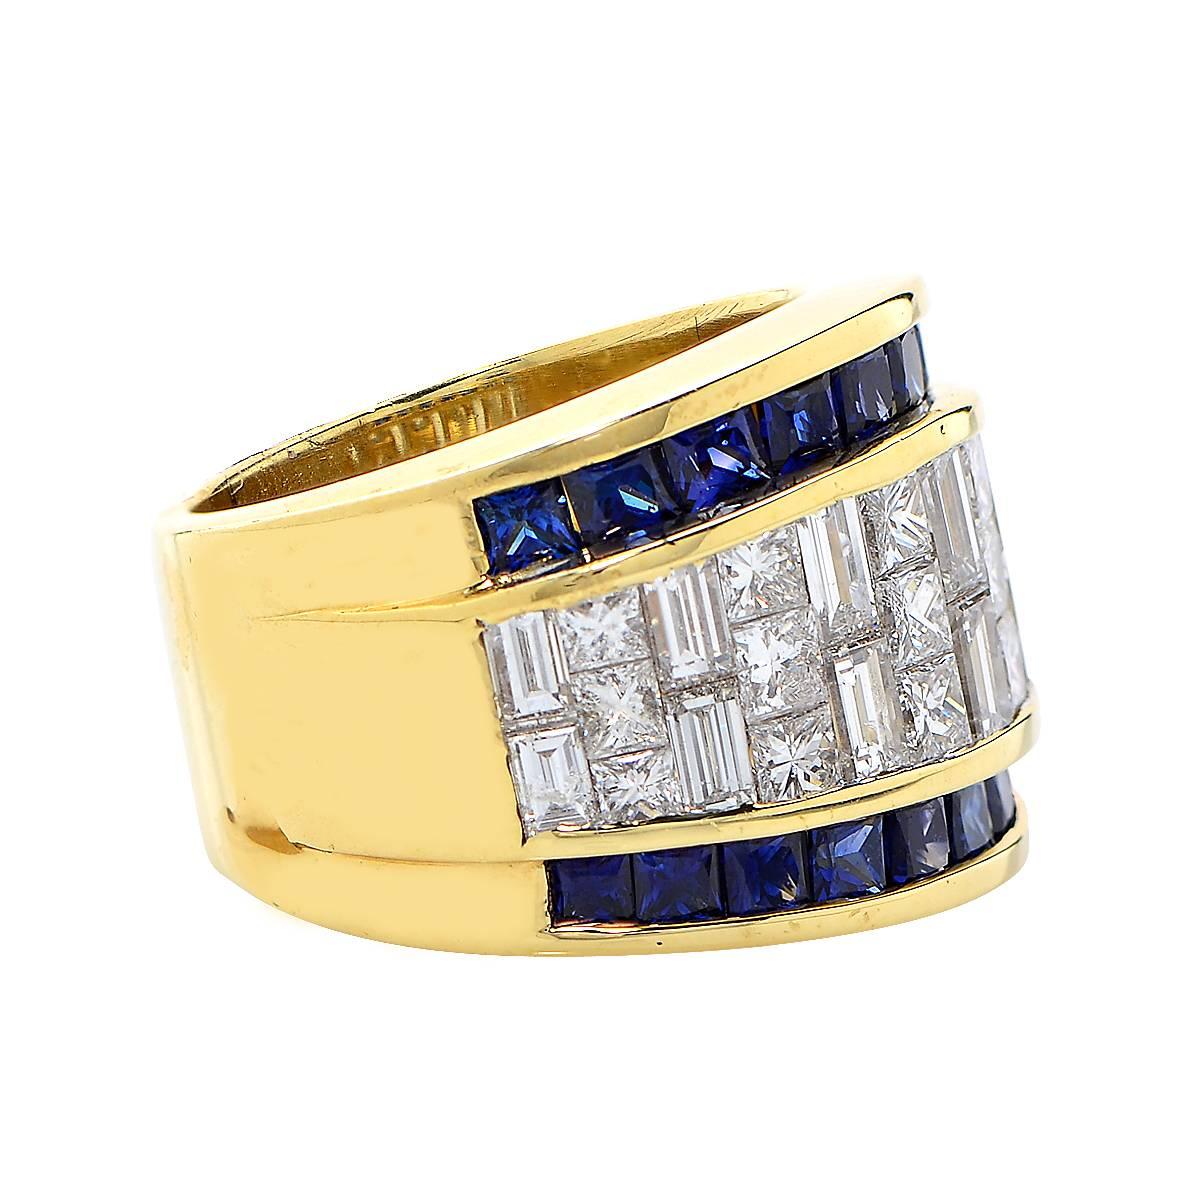 18 Karat Yellow Gold Band Set with 32 Princess and Baguette Cut Diamonds Weighing Approximately 3.25 Carats and 20 Blue Sapphires Having an Approximately Total Weight of 3 Carats.